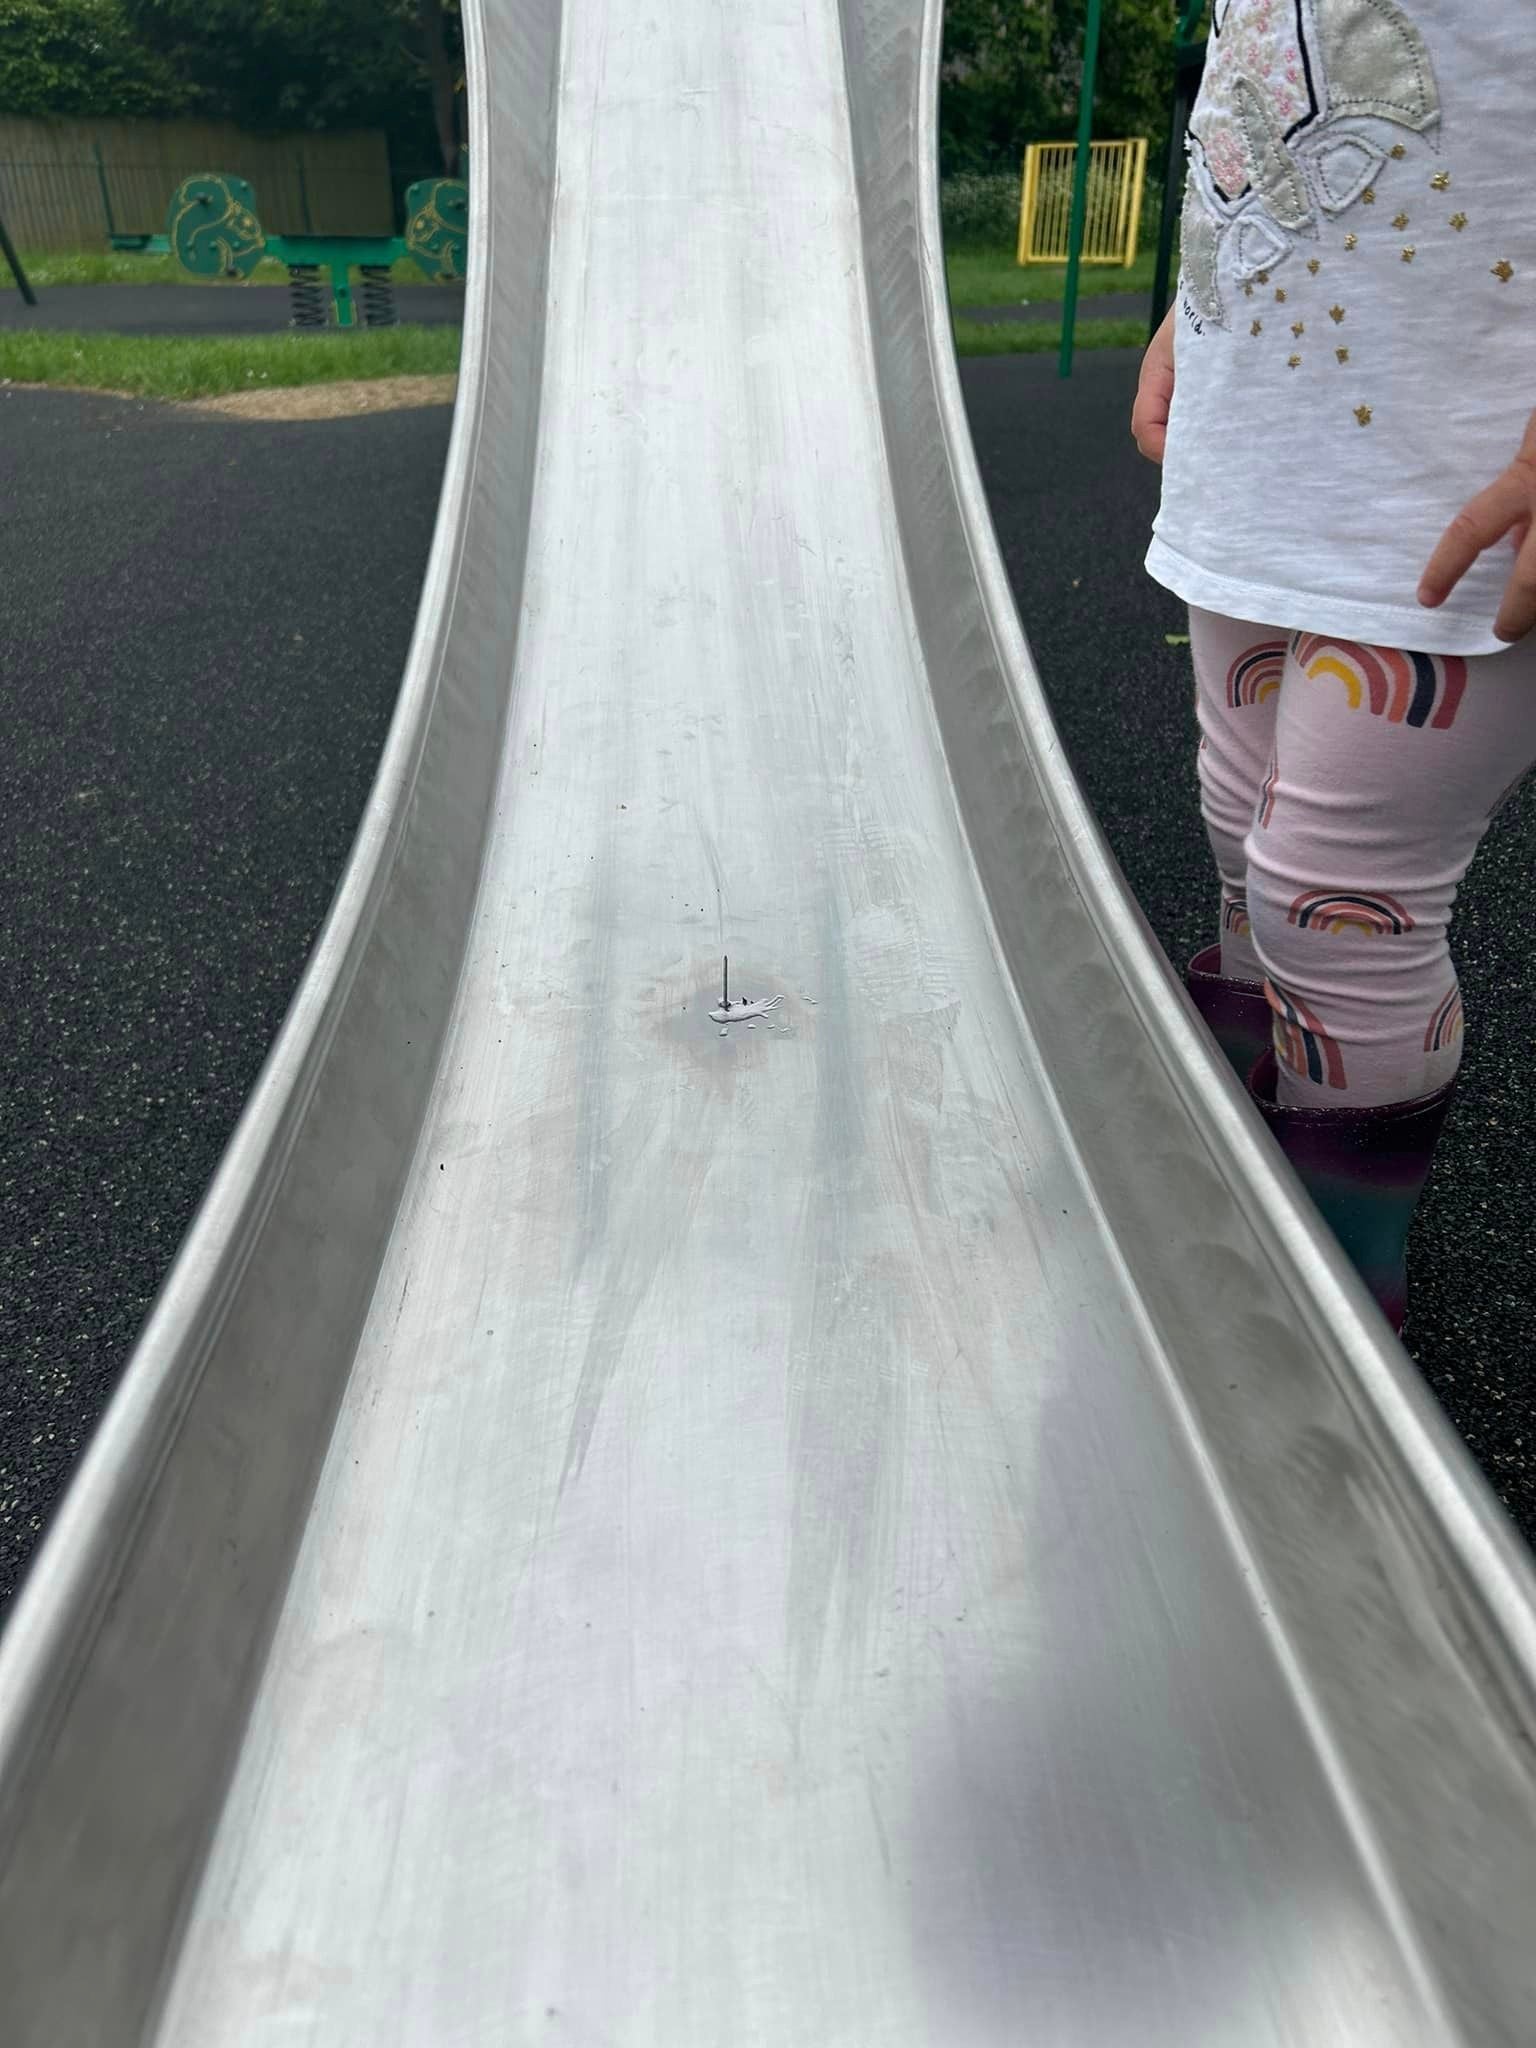 A nail glued to the Marcham Village slide